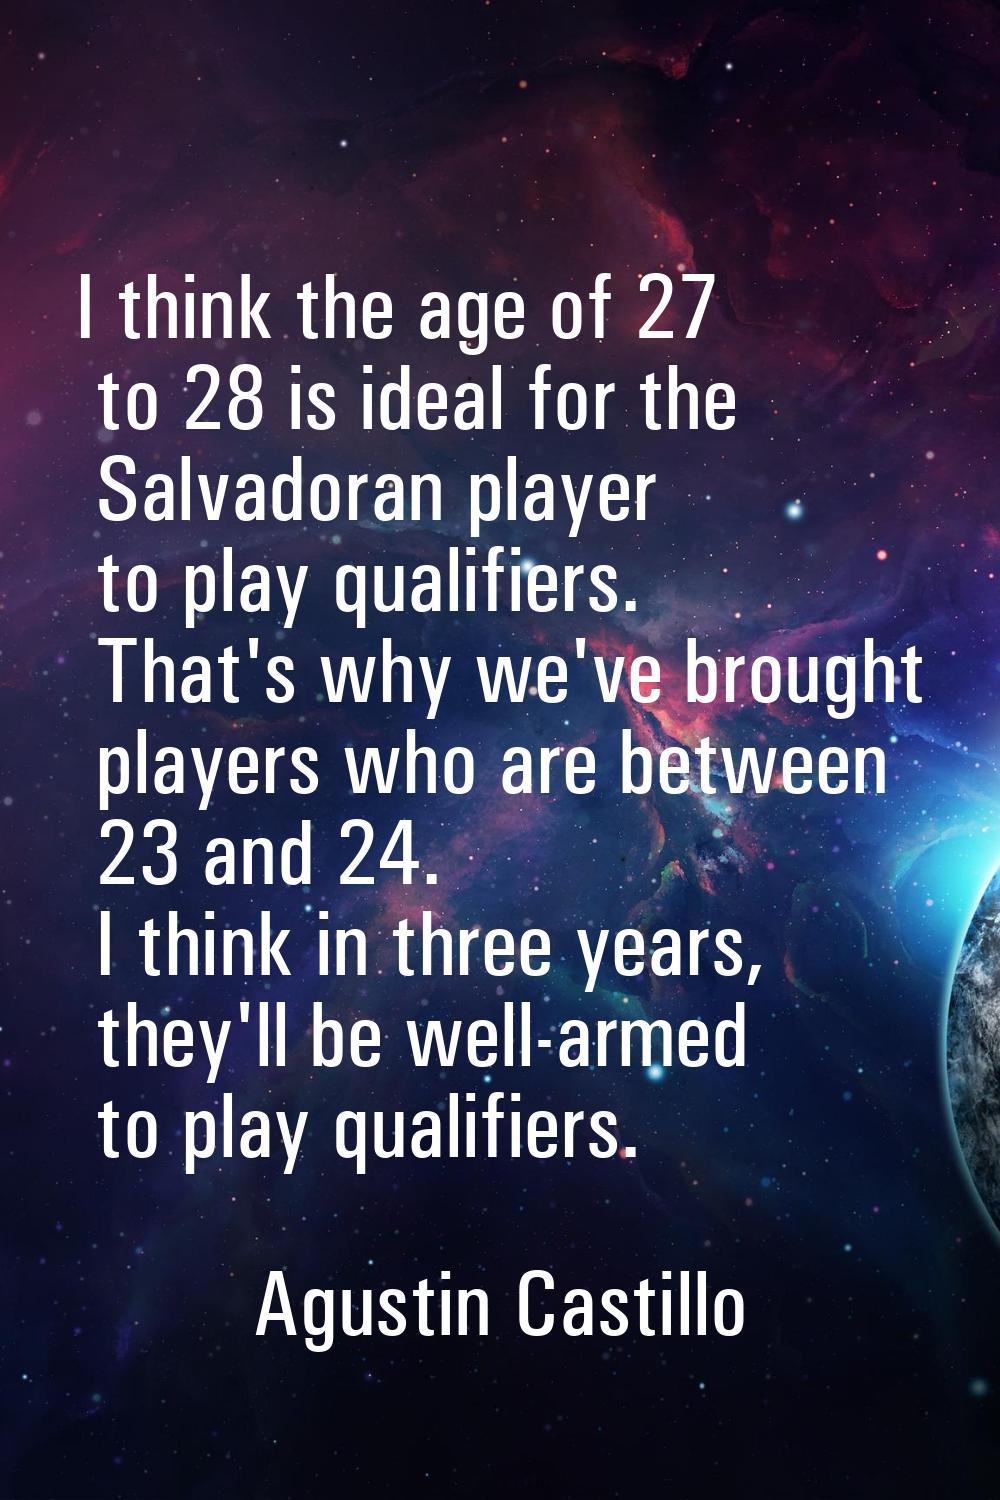 I think the age of 27 to 28 is ideal for the Salvadoran player to play qualifiers. That's why we've